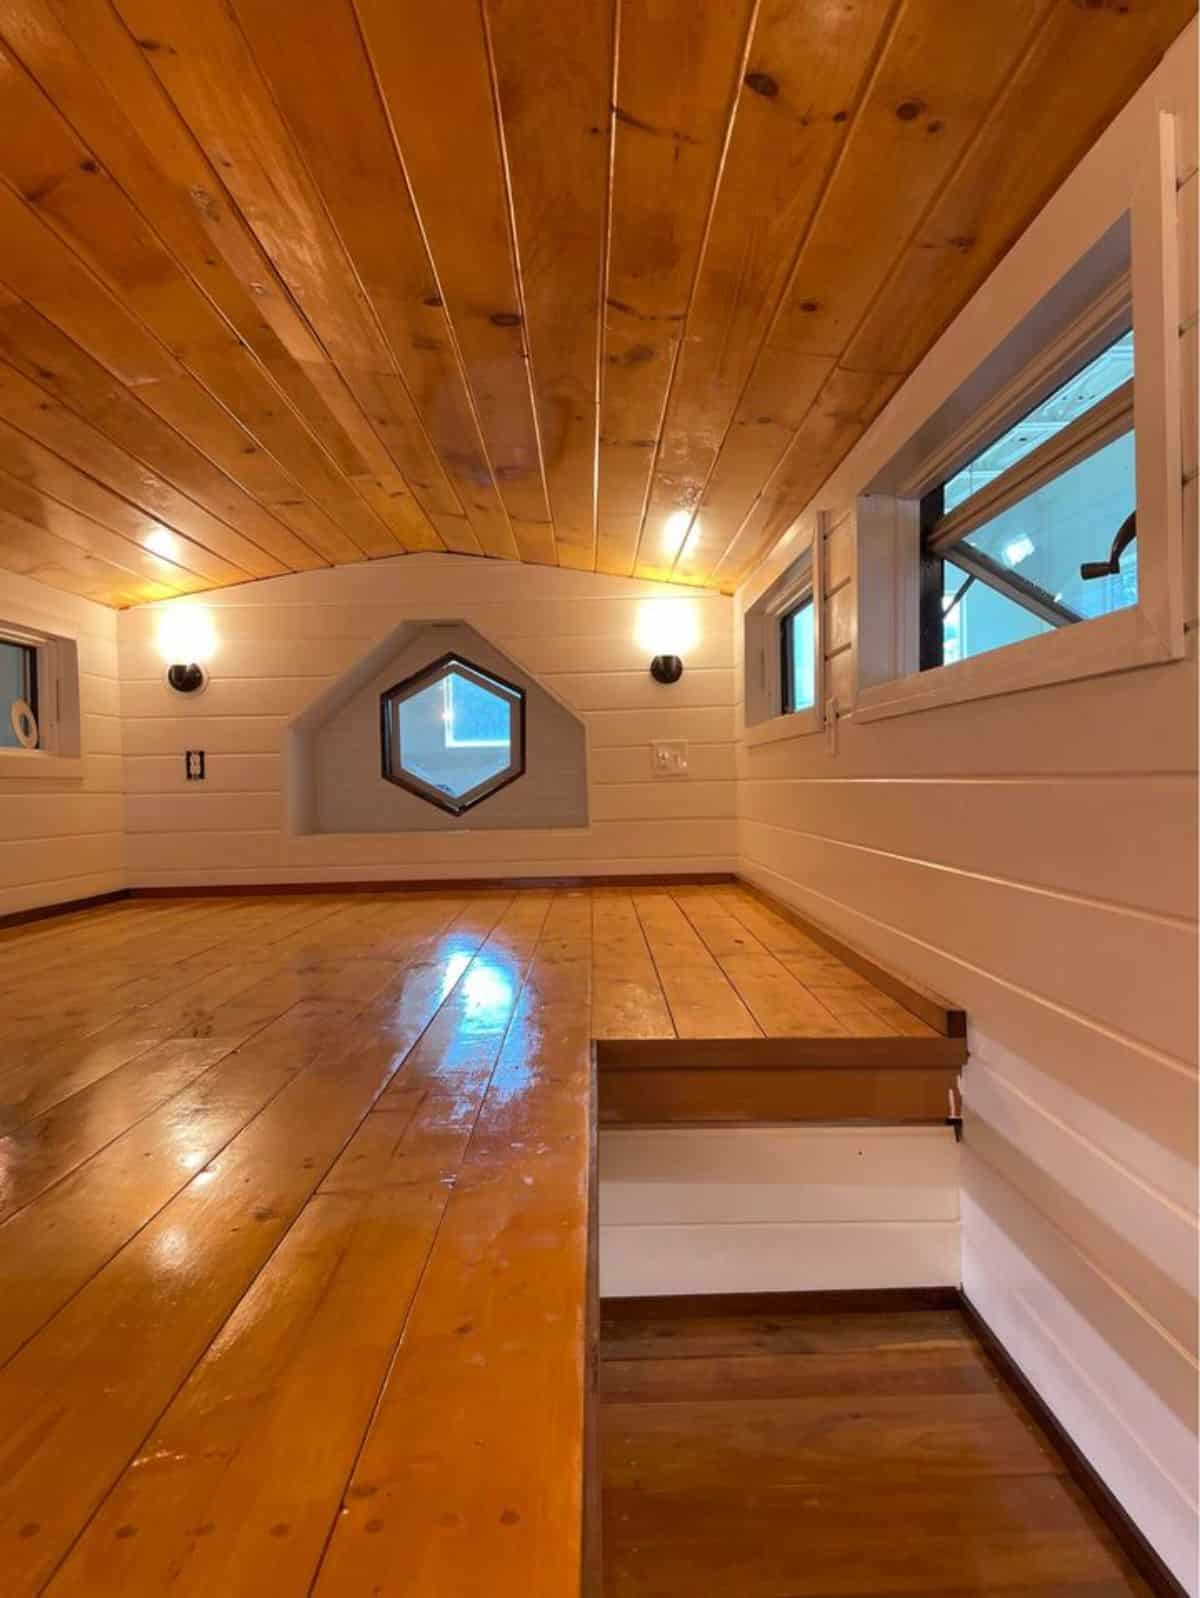 handmade hex window on one side makes the loft more bright